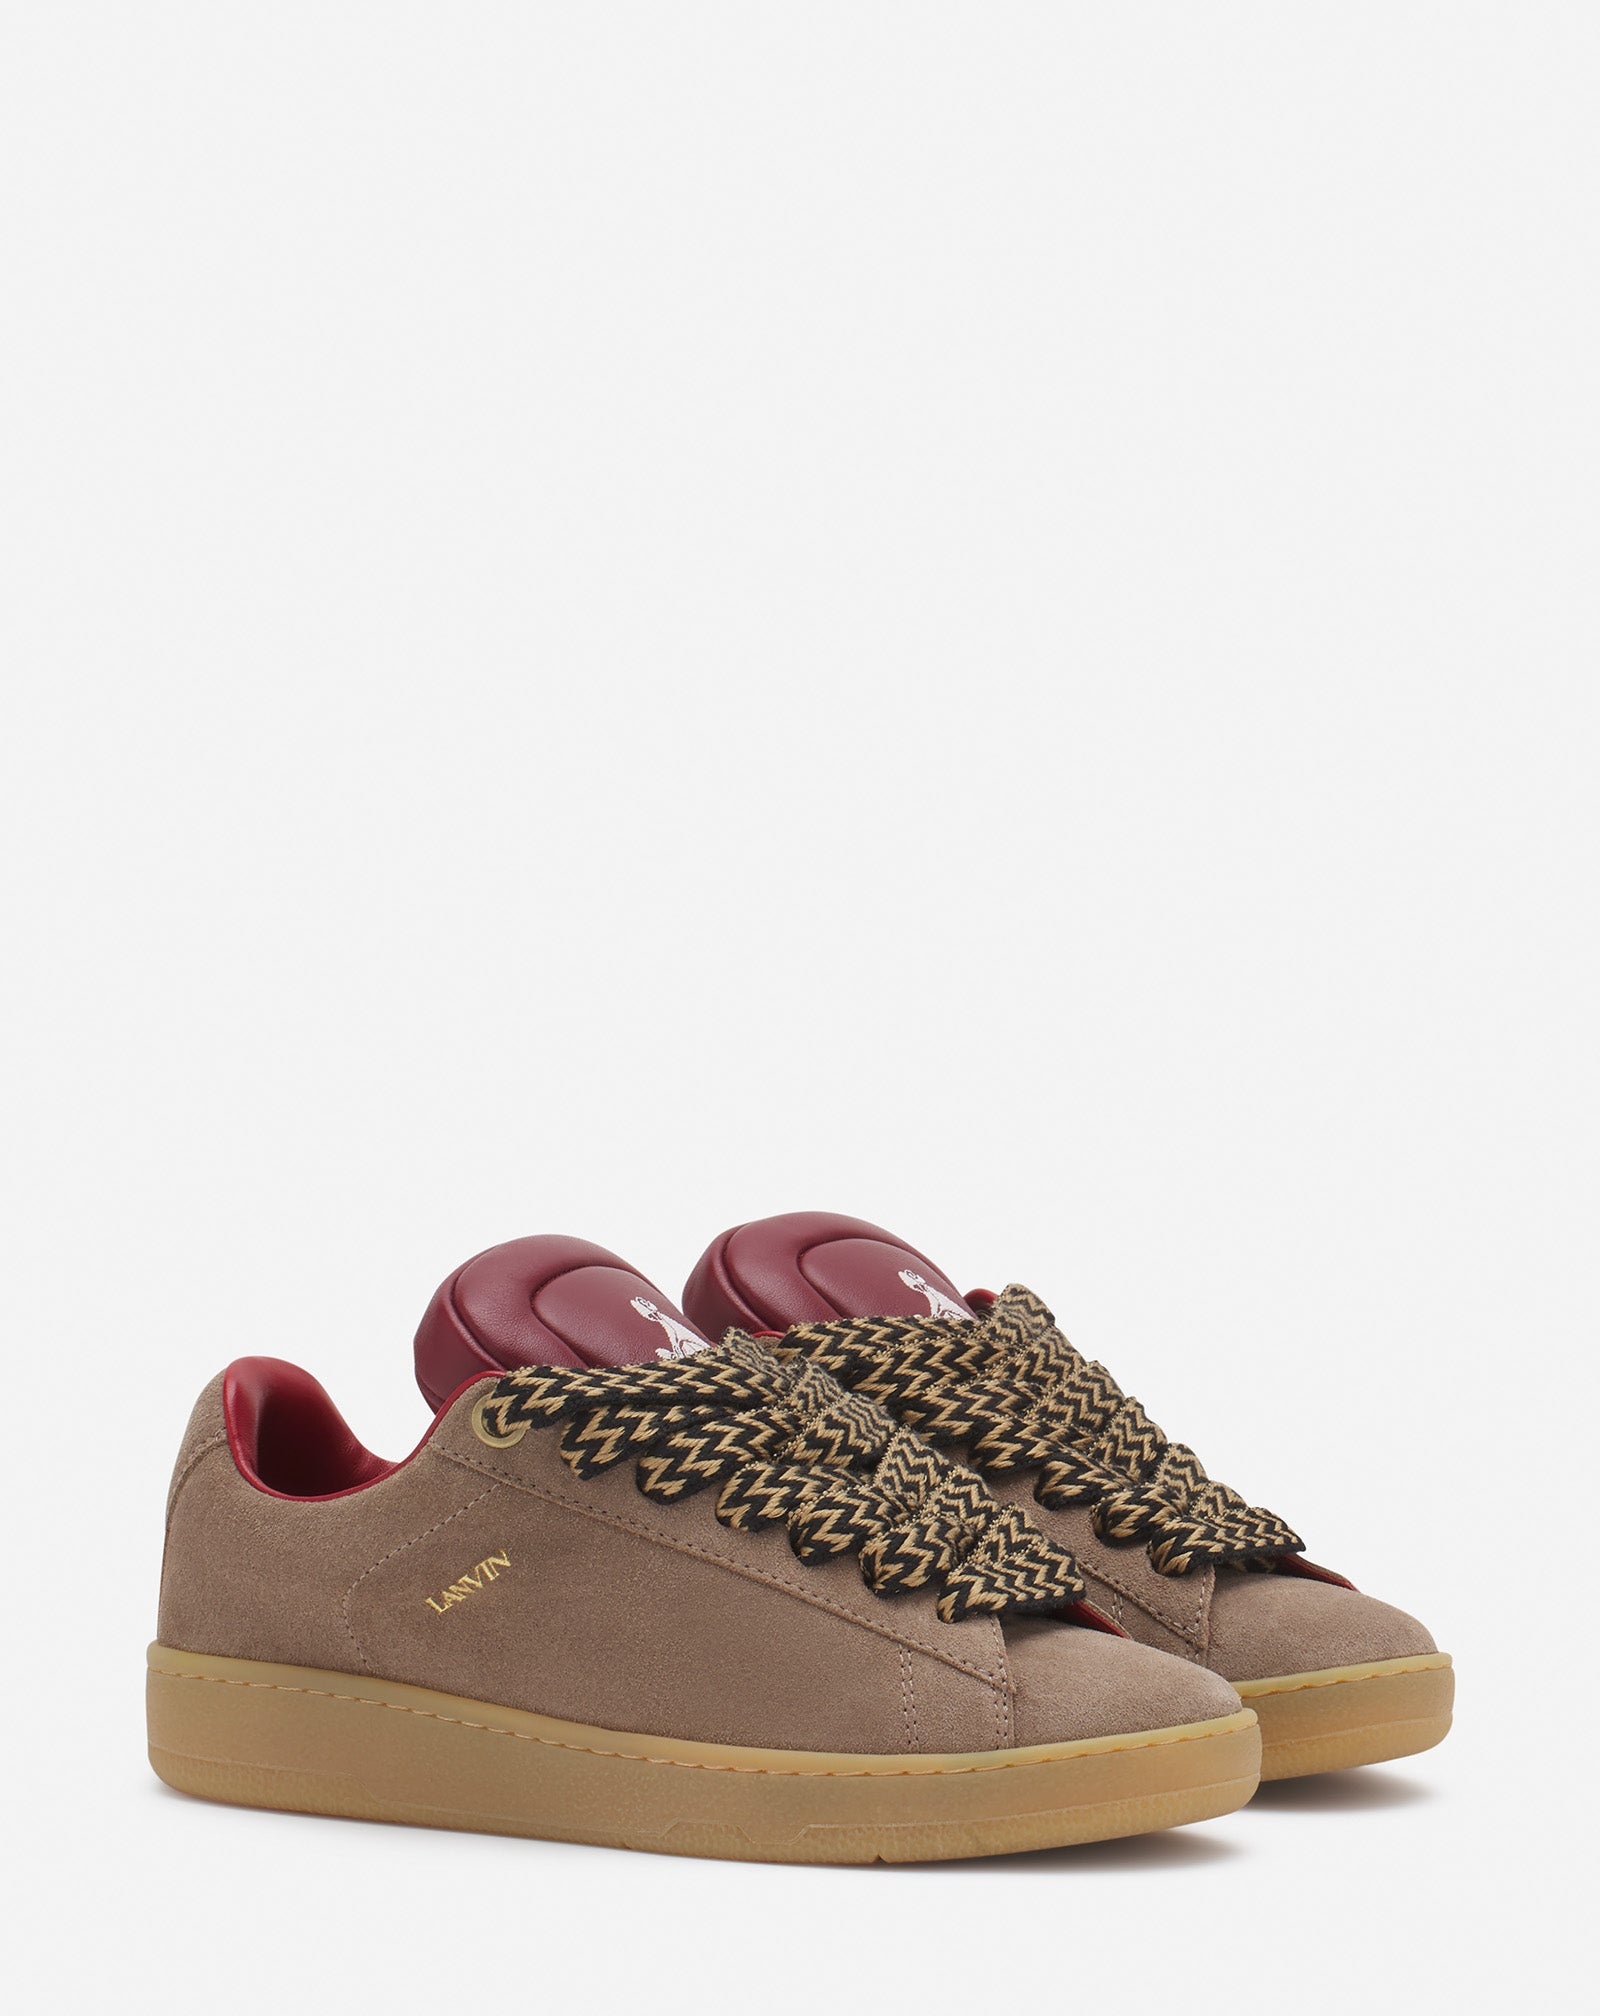 LANVIN X FUTURE HYPER CURB SNEAKERS IN LEATHER AND SUEDE FOR MEN - 2